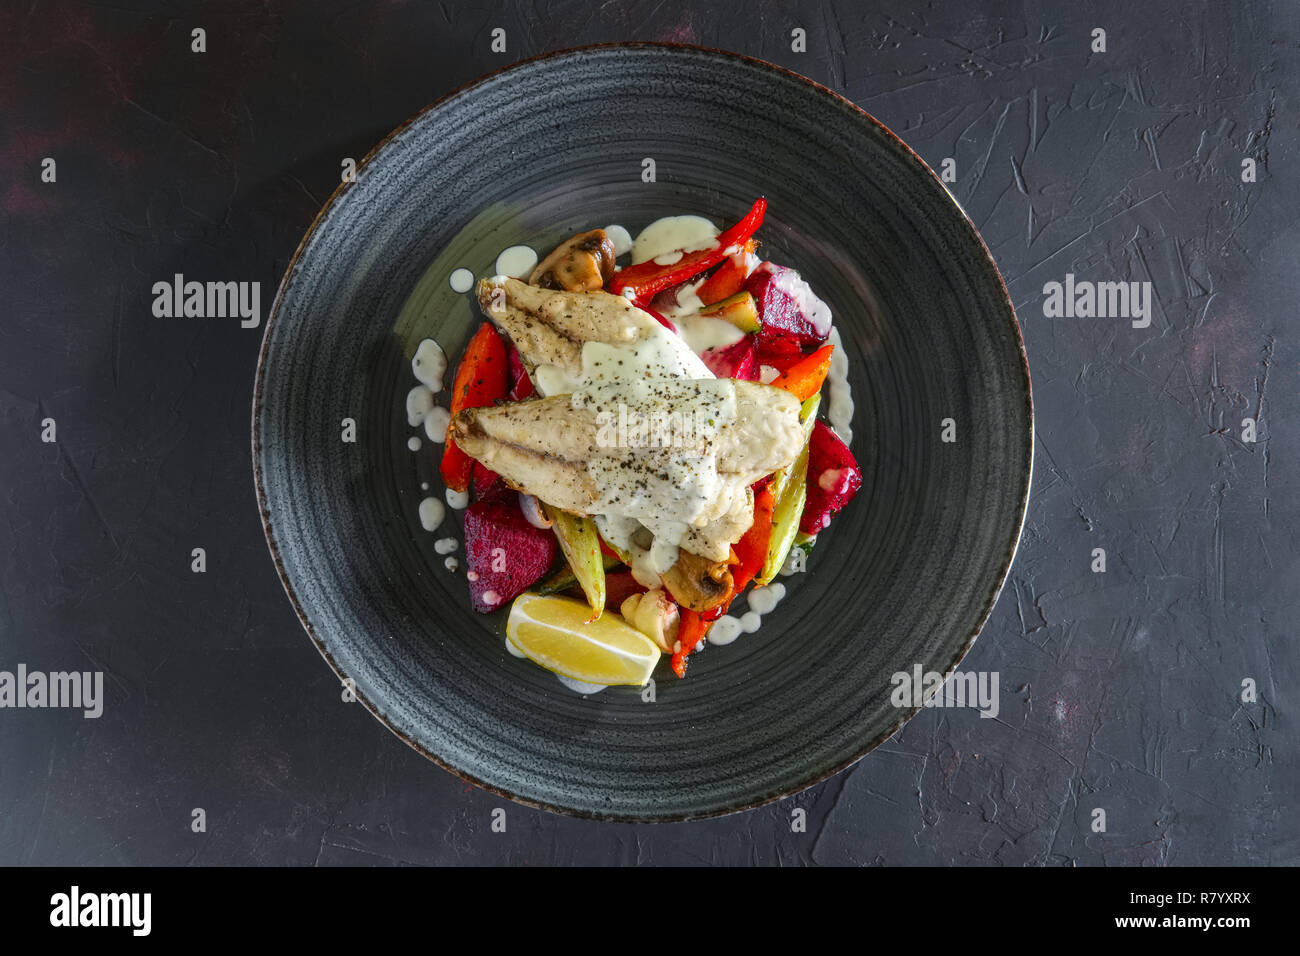 Fried fish fillet with grilled beetroot, carrot, bell pepper, zucchini, garlic on dark background Stock Photo